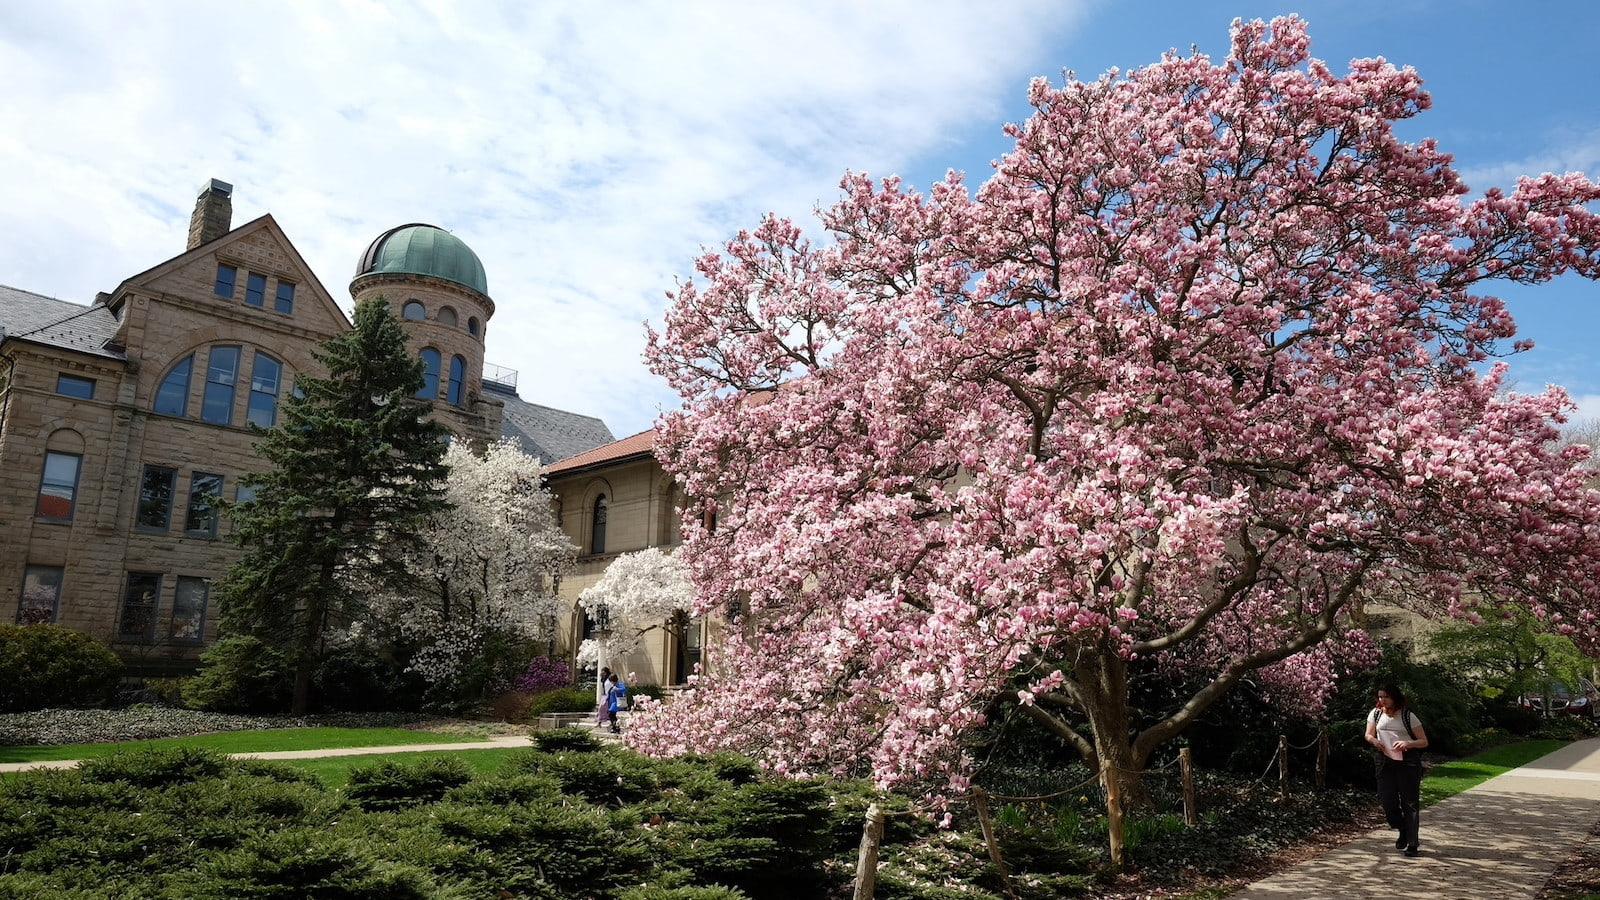 Peters Hall and Cox Administration Building looking over a magnolia tree in spring.